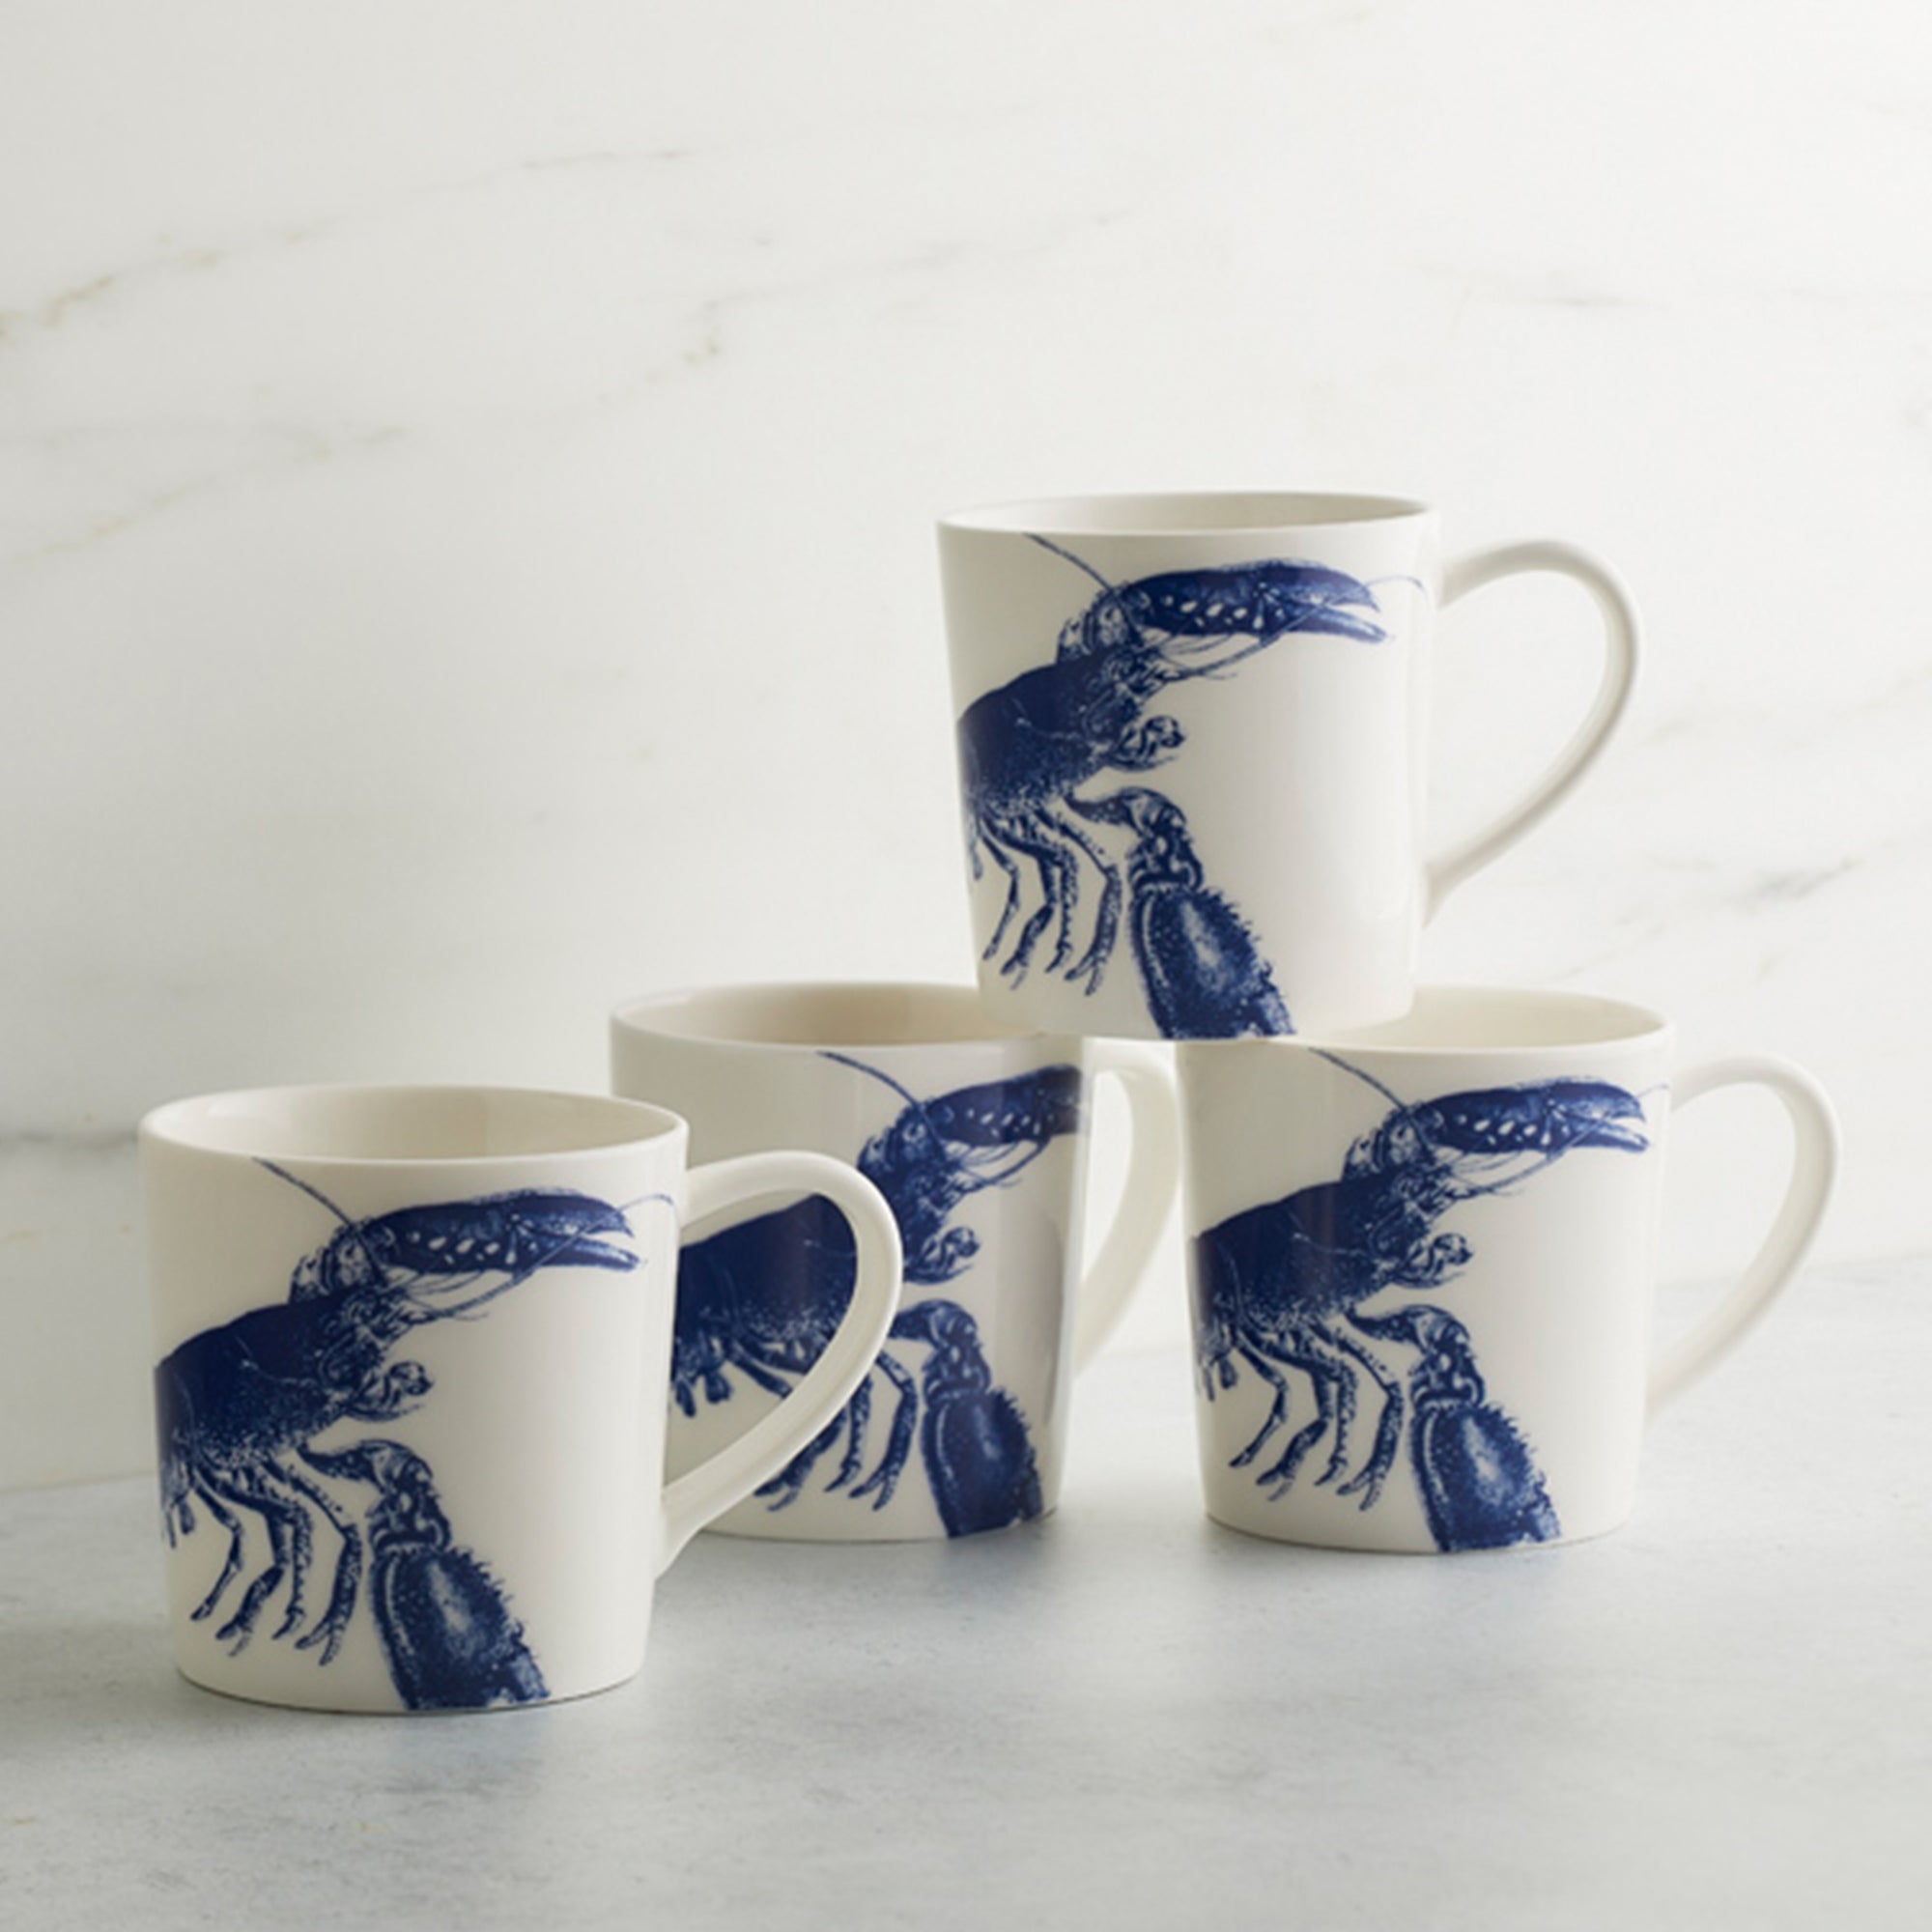 Lobster Mug by Caskata Artisanal Home featuring a blue illustration of a lobster on a plain background. Made in Sri Lanka with high-fired porcelain for durability and elegance.